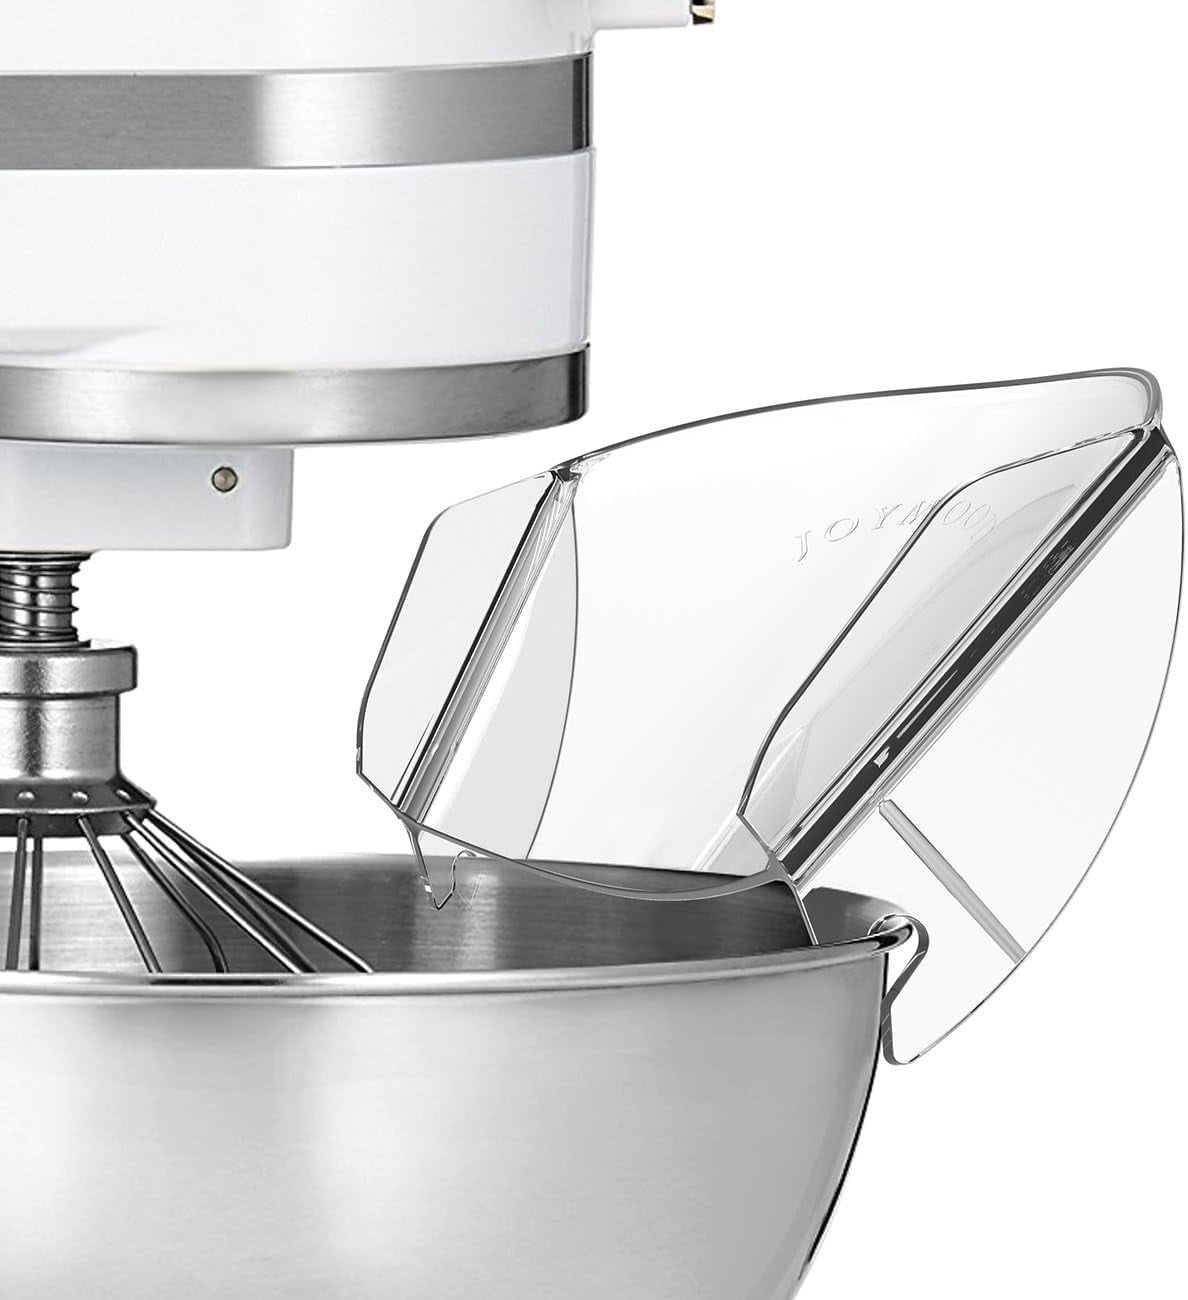 GVODE Stainless Steel Flex Edge Beater for KitchenAid Mixer, Fits Tilt-Head  Stand Mixer Bowls For 4.5-5 qt. Bowls FXKTHP-9008 - The Home Depot